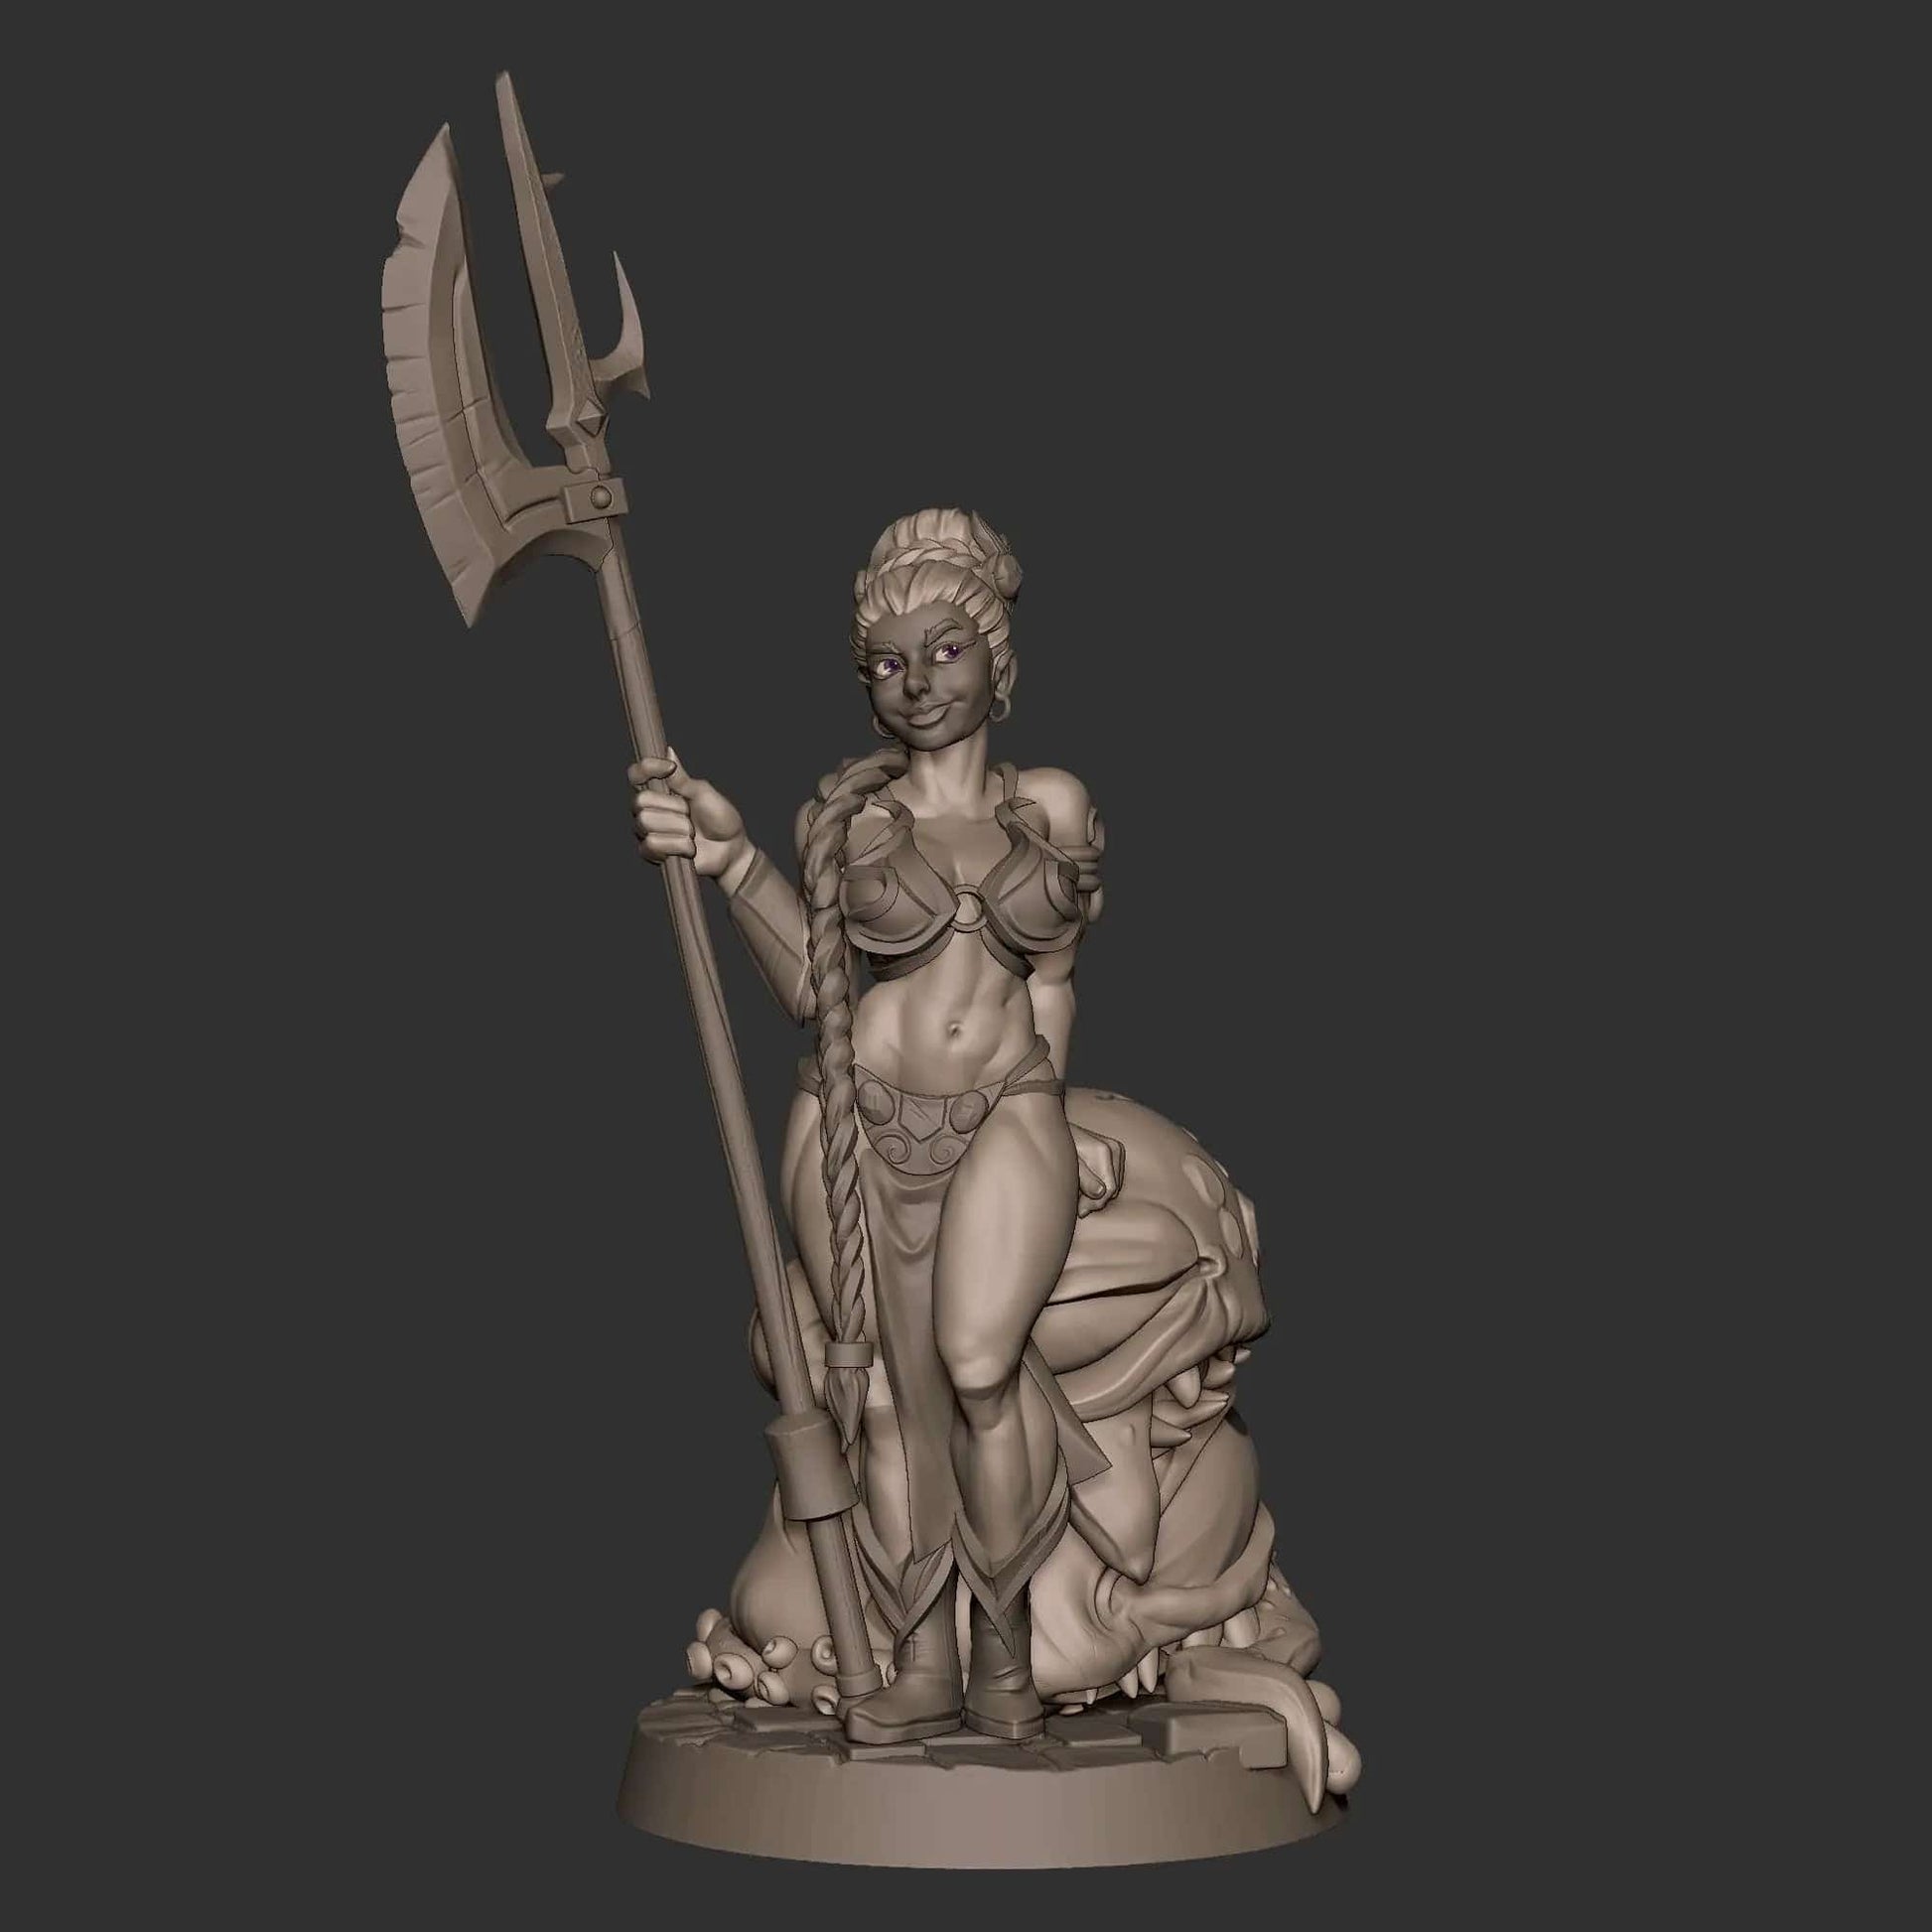 Lizzy, Pinup SFW NSFW Lovely Woman, Dwarven Warrior | D&D Miniature Pinup | Bite the Bullet - Tattles Told 3D